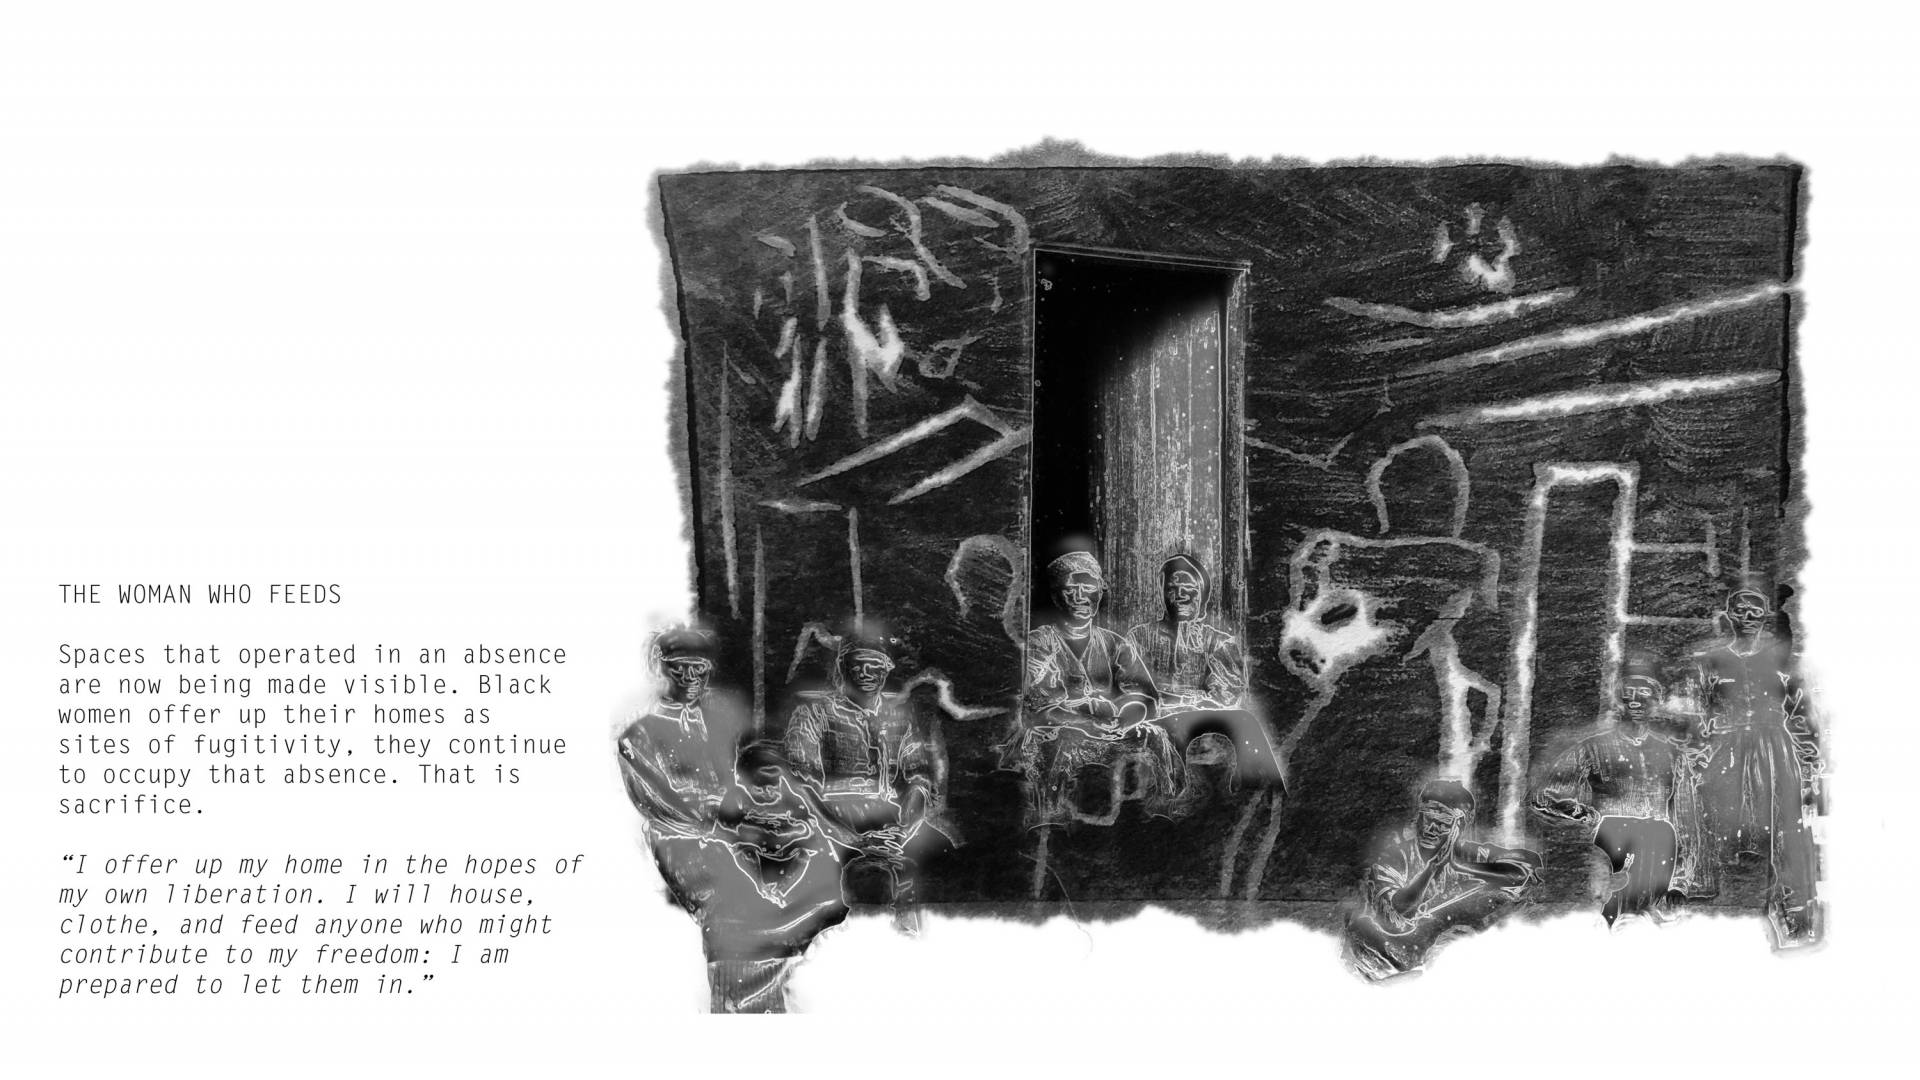 Drawing of figures in a log cabin with words, "The Woman Who Feeds. Spaces that operated in an absence are now being made visible. Black women offer up their homes as sites of fugitivity, they continue to occupy that absence. That is sacrifice. 'I offer up my home in hopes of my own liberation. I will house, clothe, and feed anyone who might contribute to my freedom: I am prepared to let them in.'"